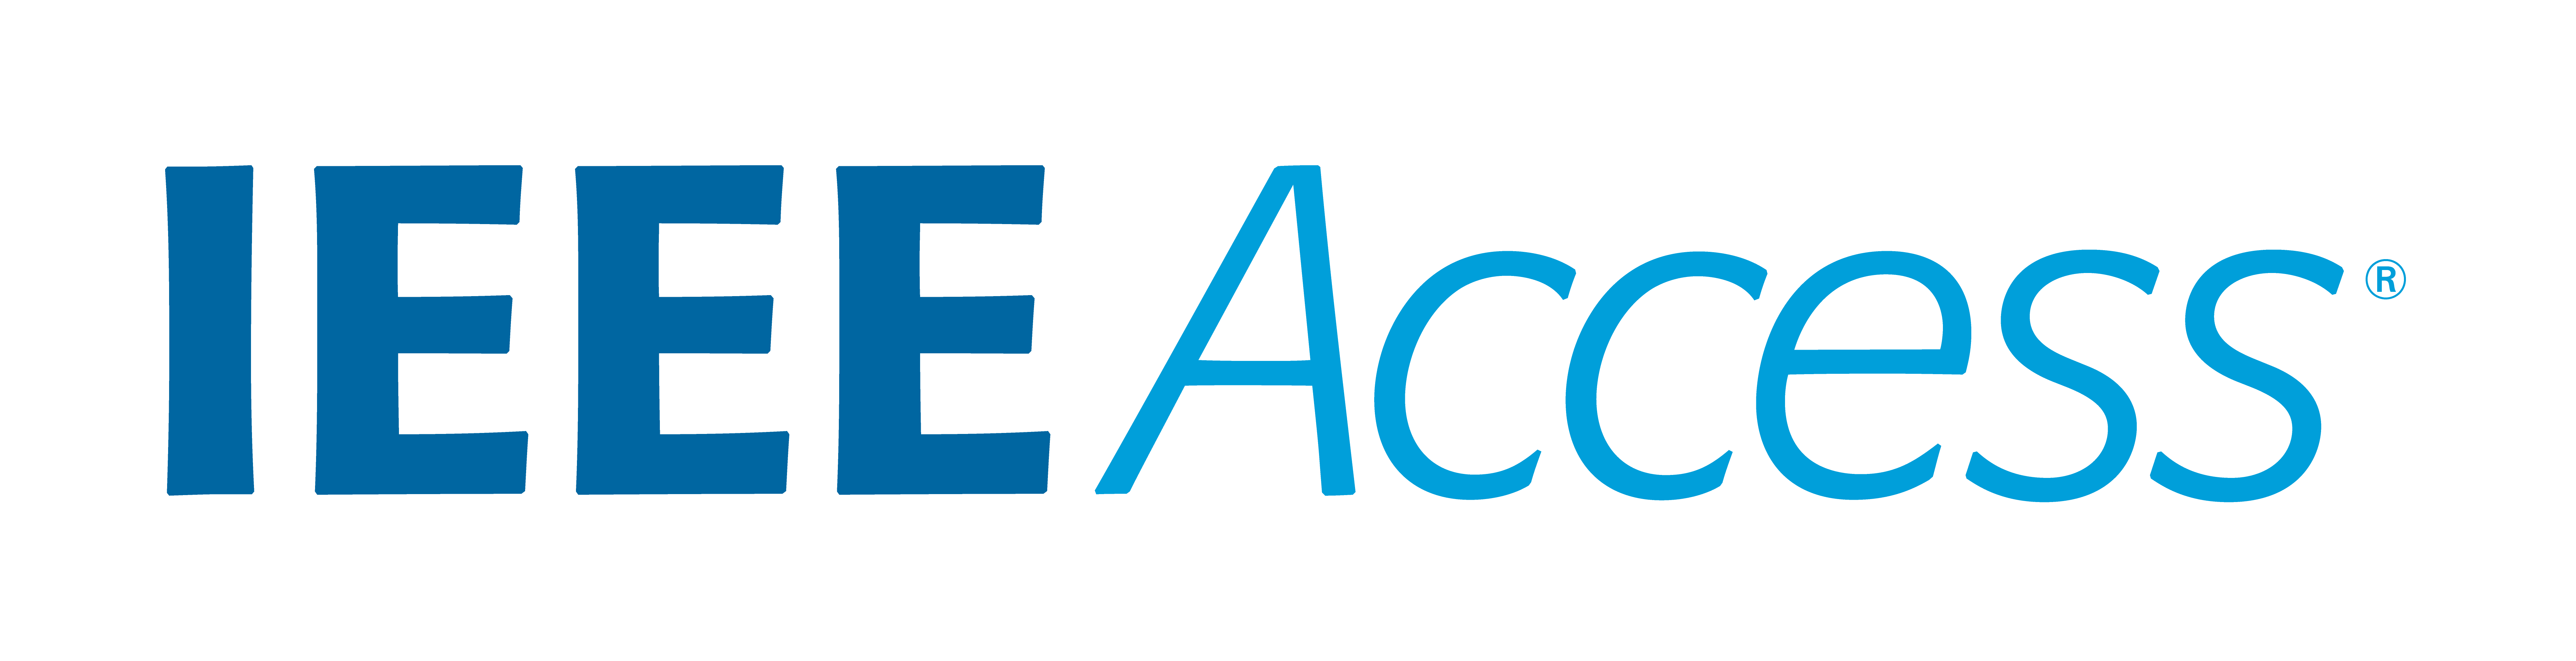 Access Logo - Learn More About IEEE Access AccessIEEE Access